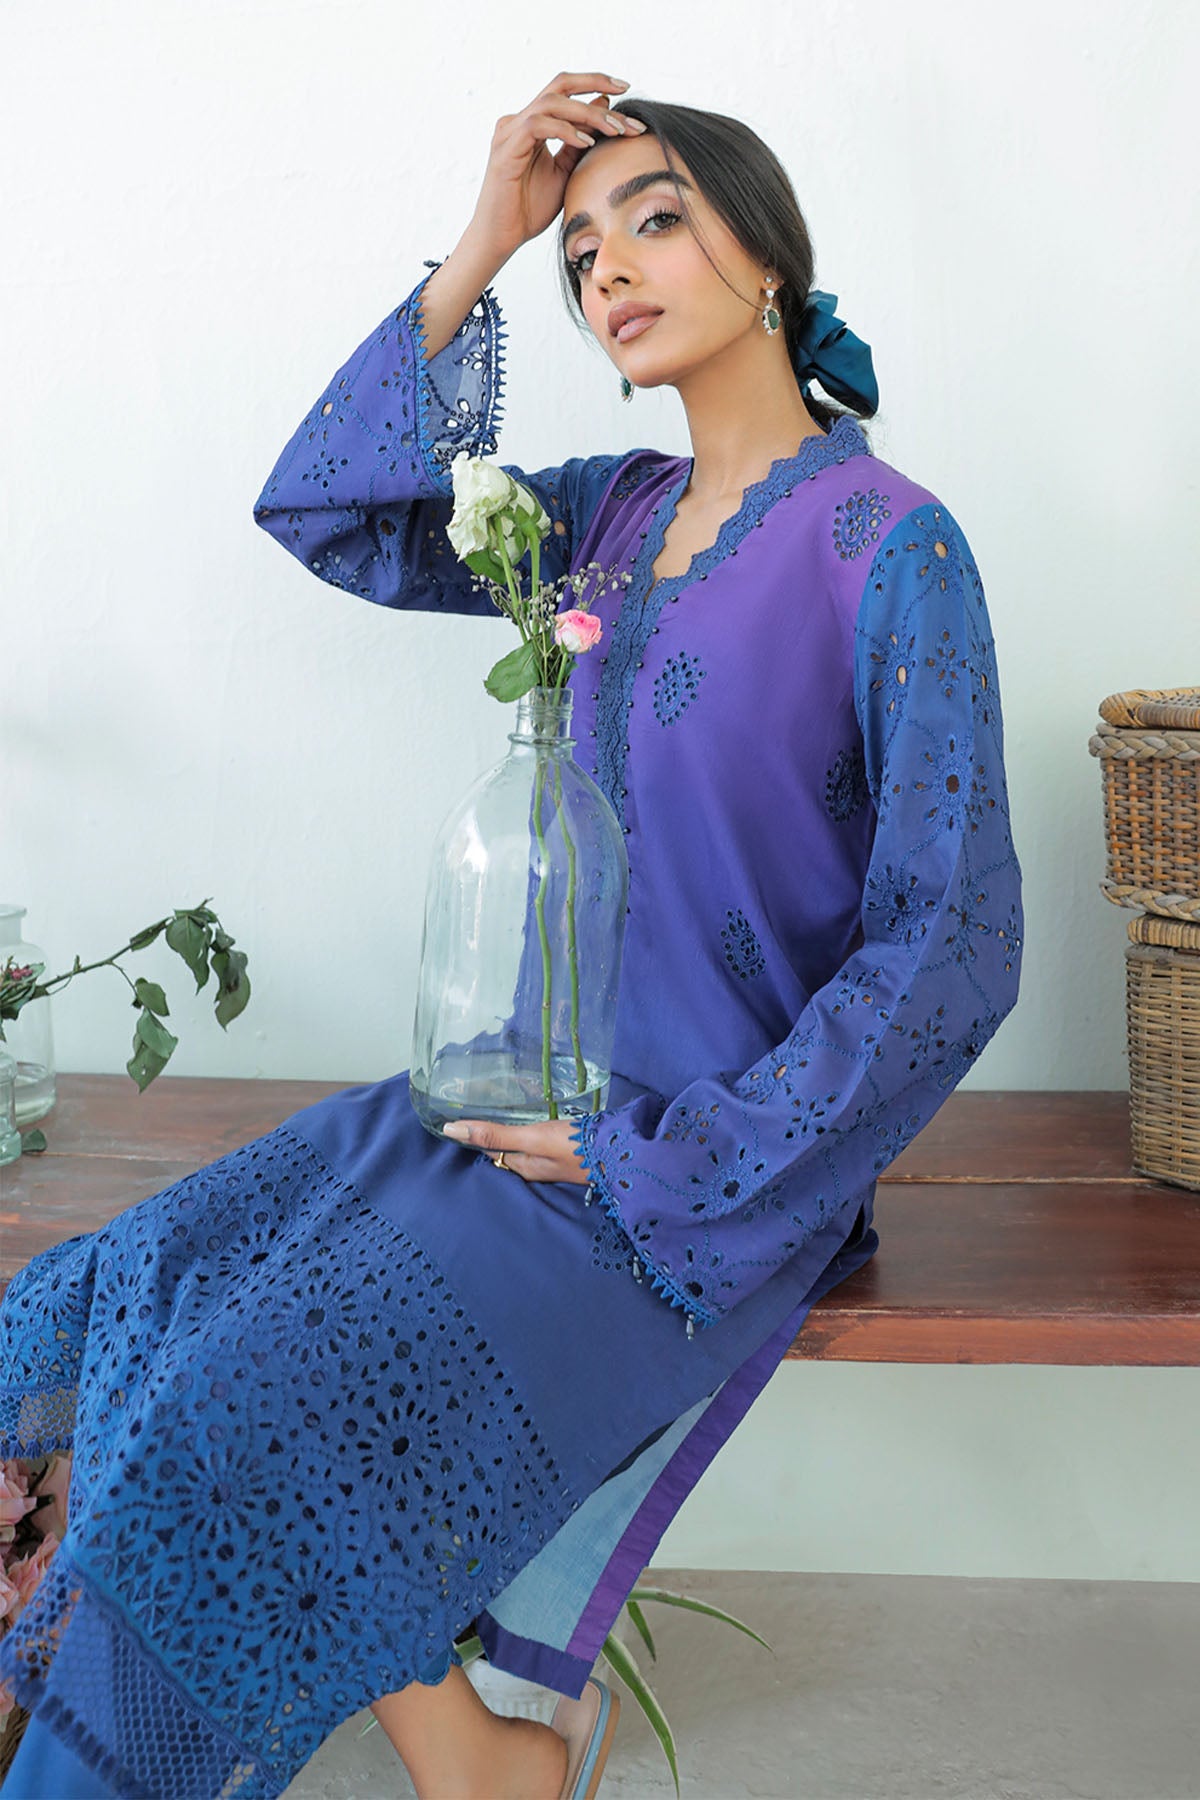 Pakisatani Suit Set made from lawn cotton in ombre blue colour